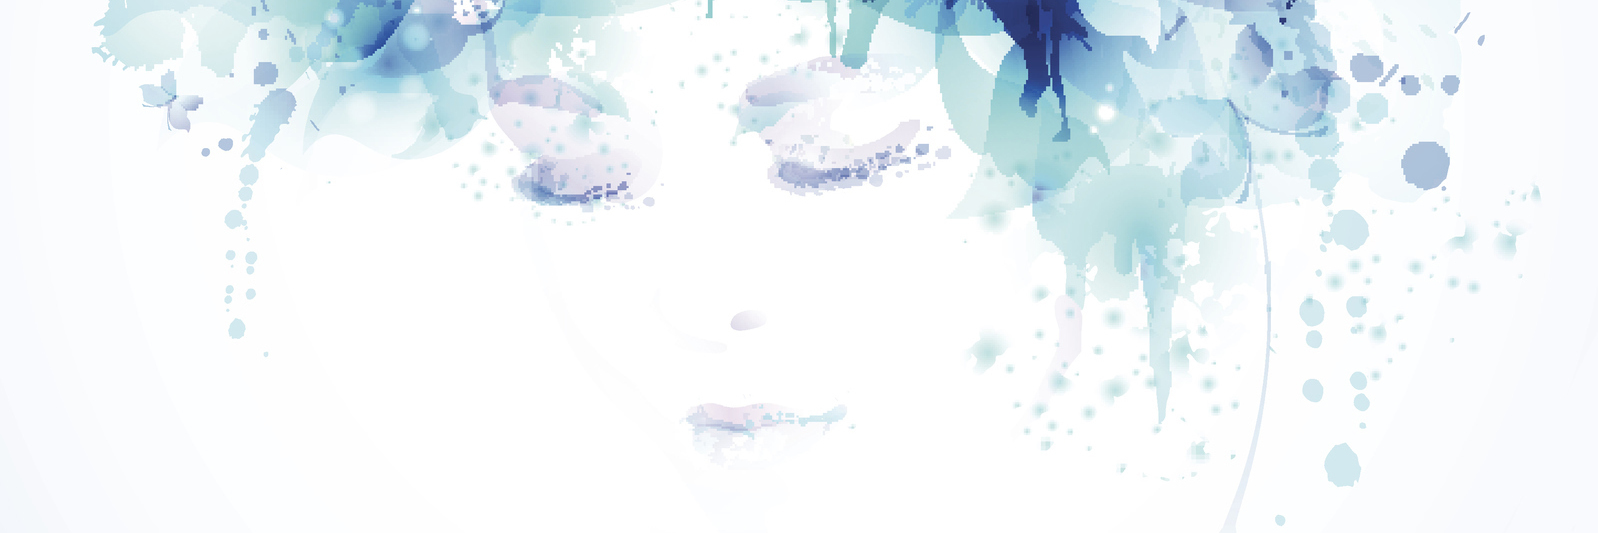 illustration of woman's face surrounded by blue flowers